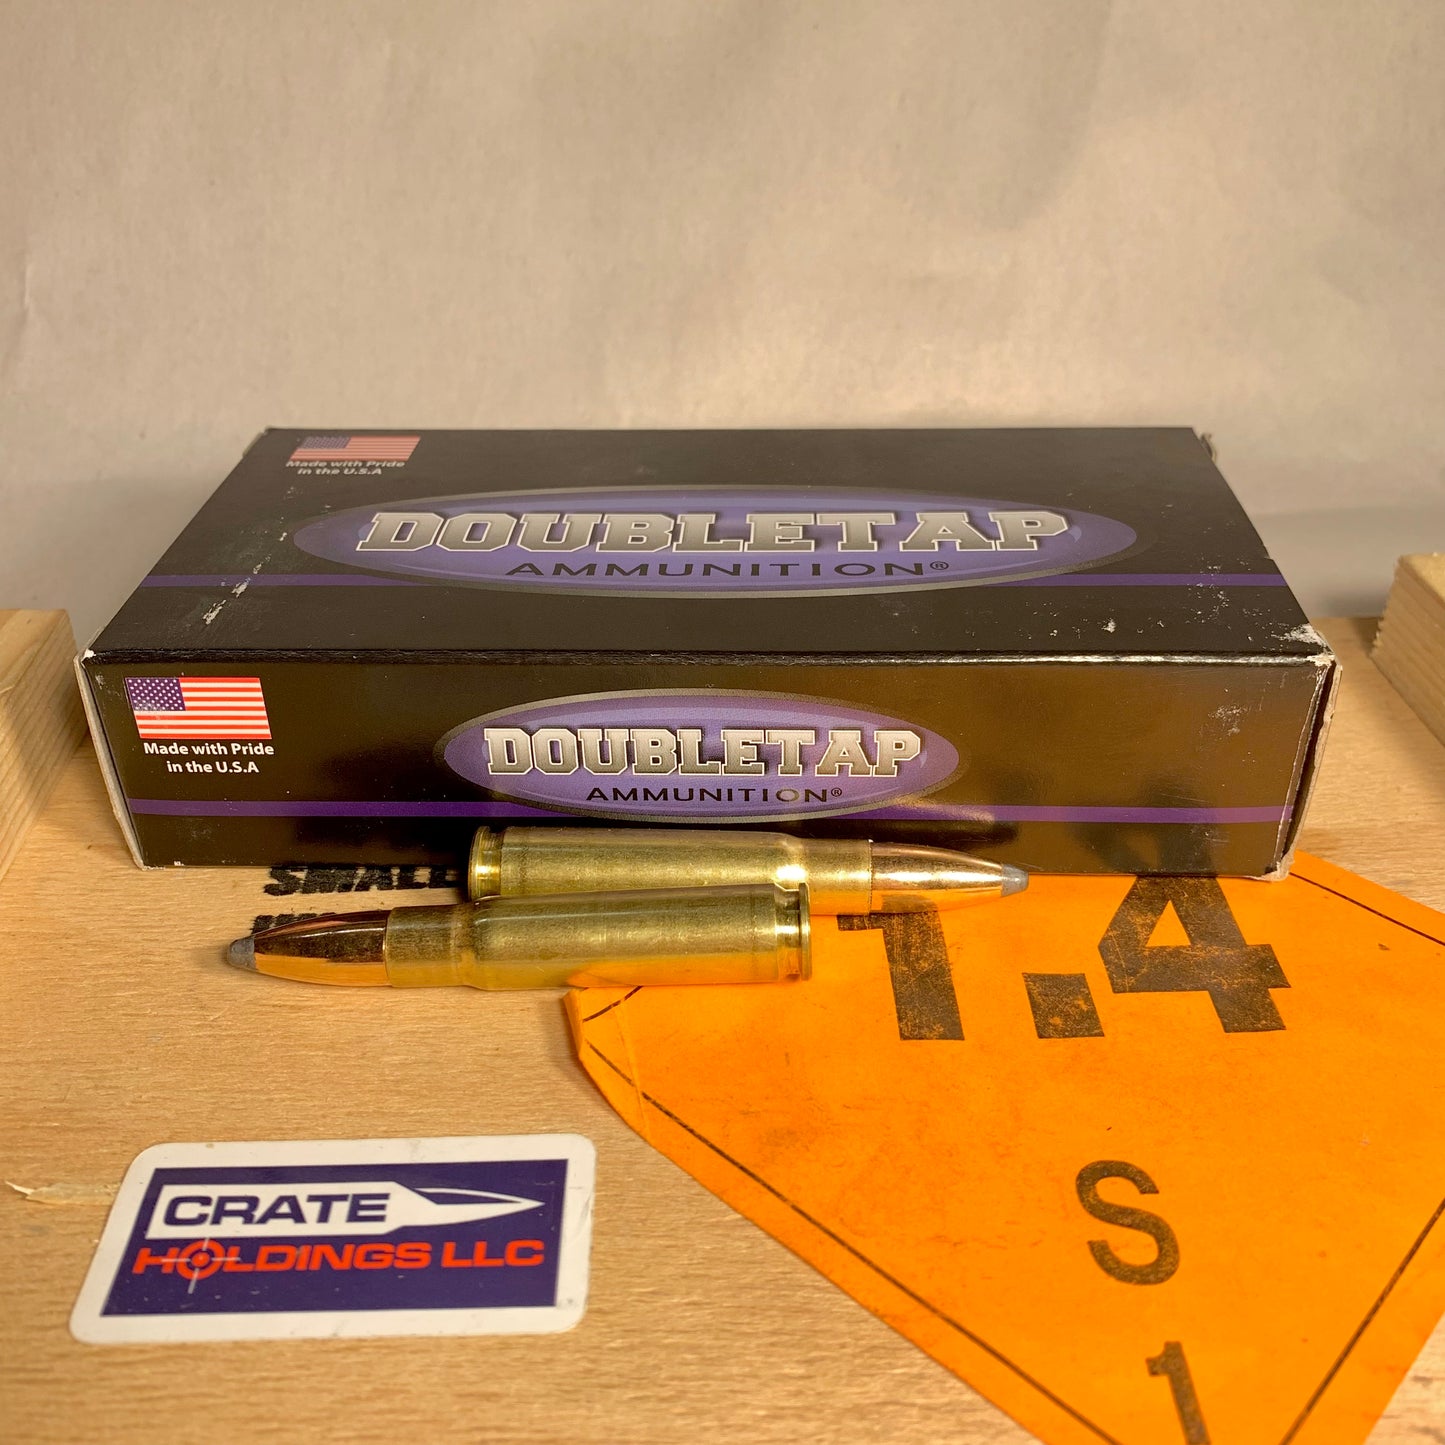 20 Count Box DoubleTap .358 Winchester Ammo 250gr Controlled Expansion